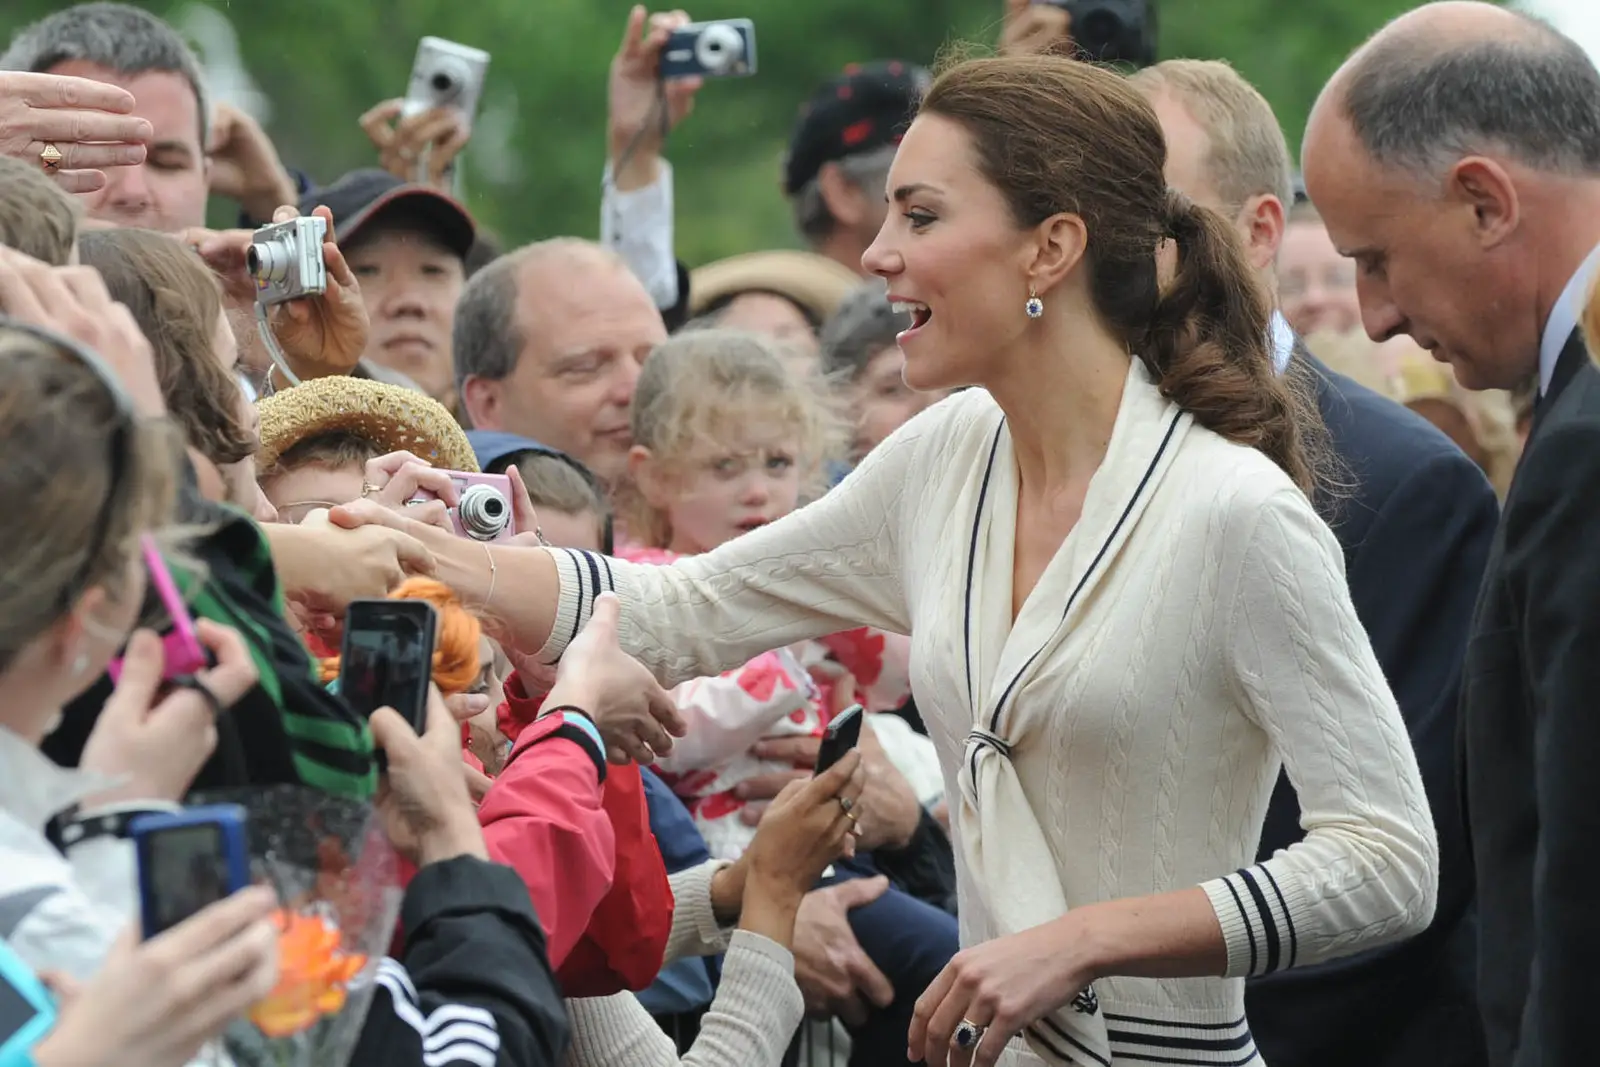 The Duchess of Cambrdige in nautical Alexander McQueen for Prince Edward Island visit